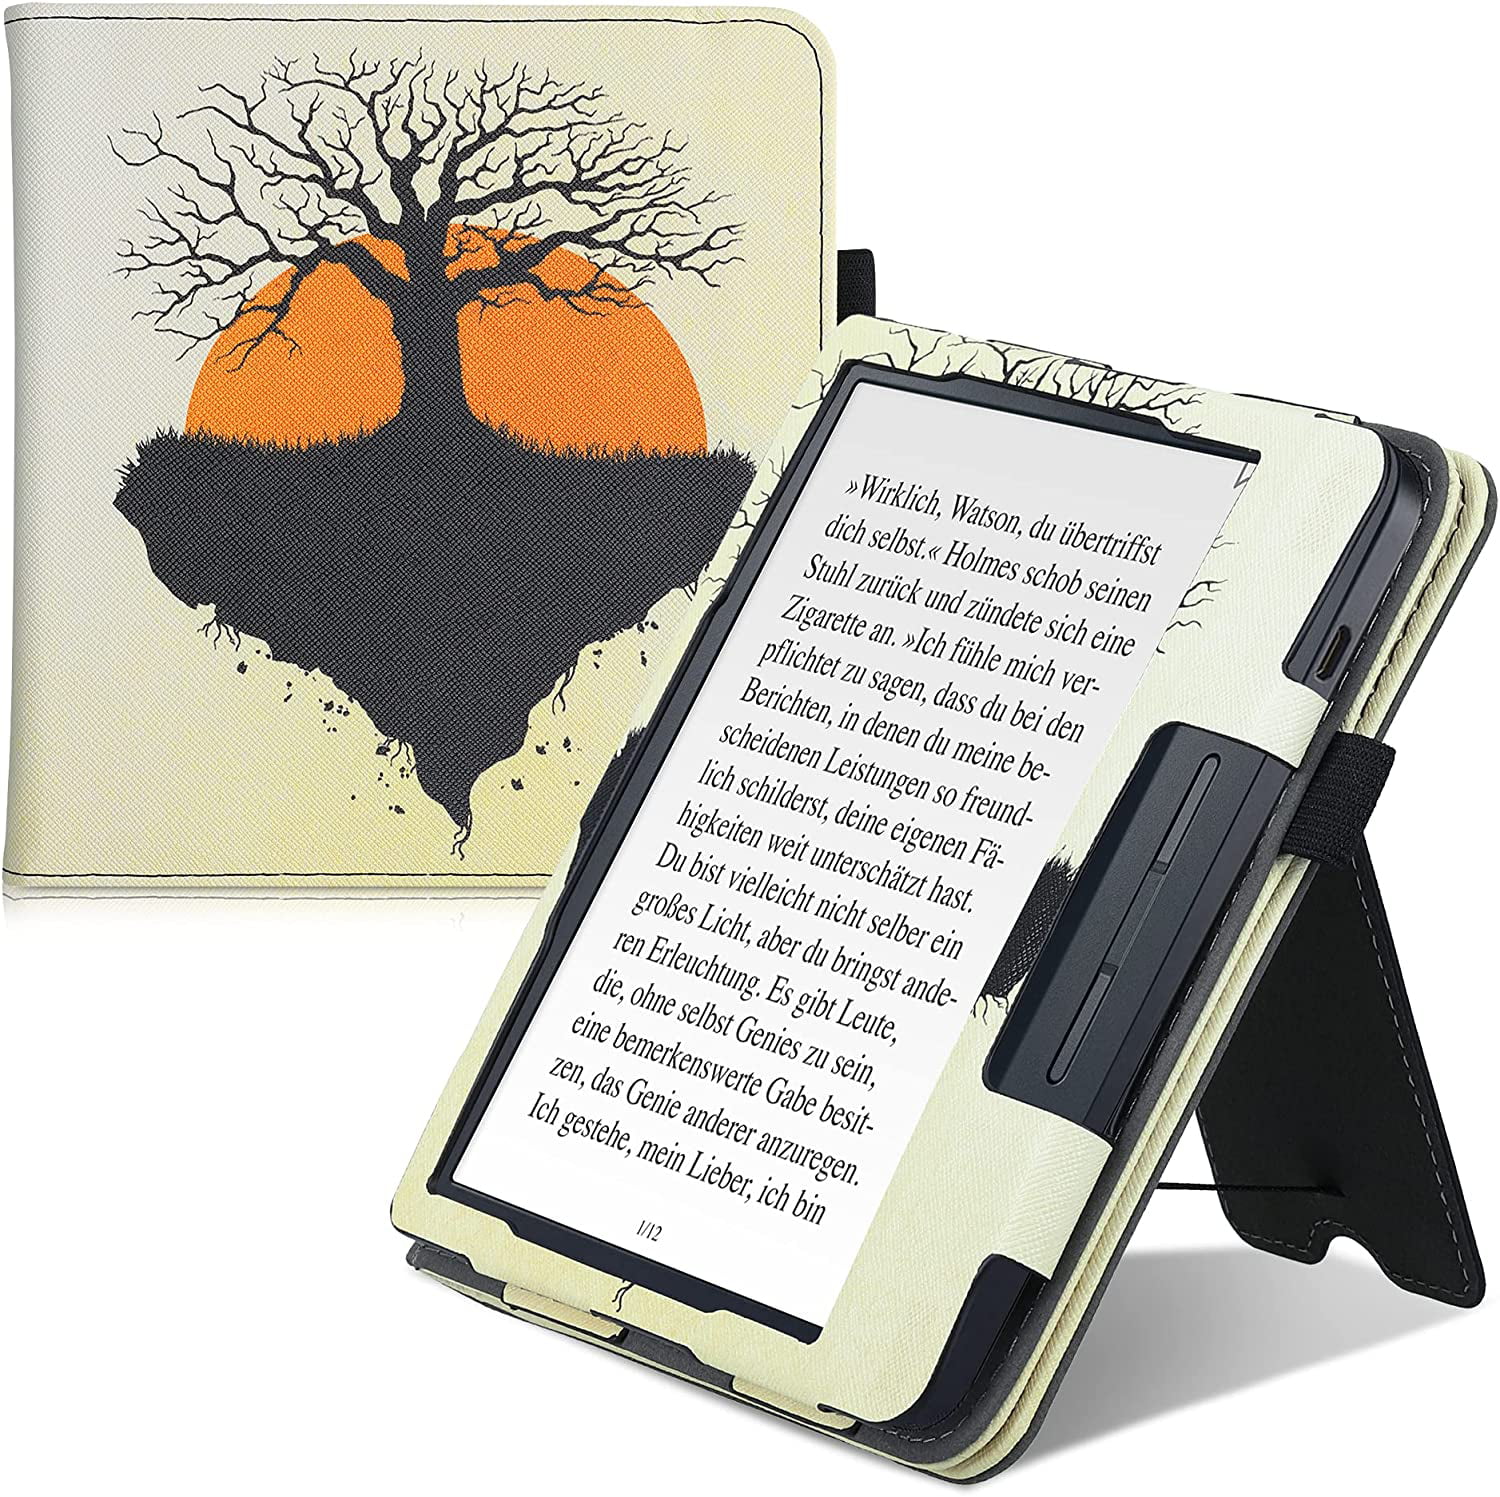 Strap Card Slot Setting Sun Black/Orange/Beige kwmobile Case Compatible with Kobo Libra H2O Stand Case PU Leather Cover with Magnet Closure